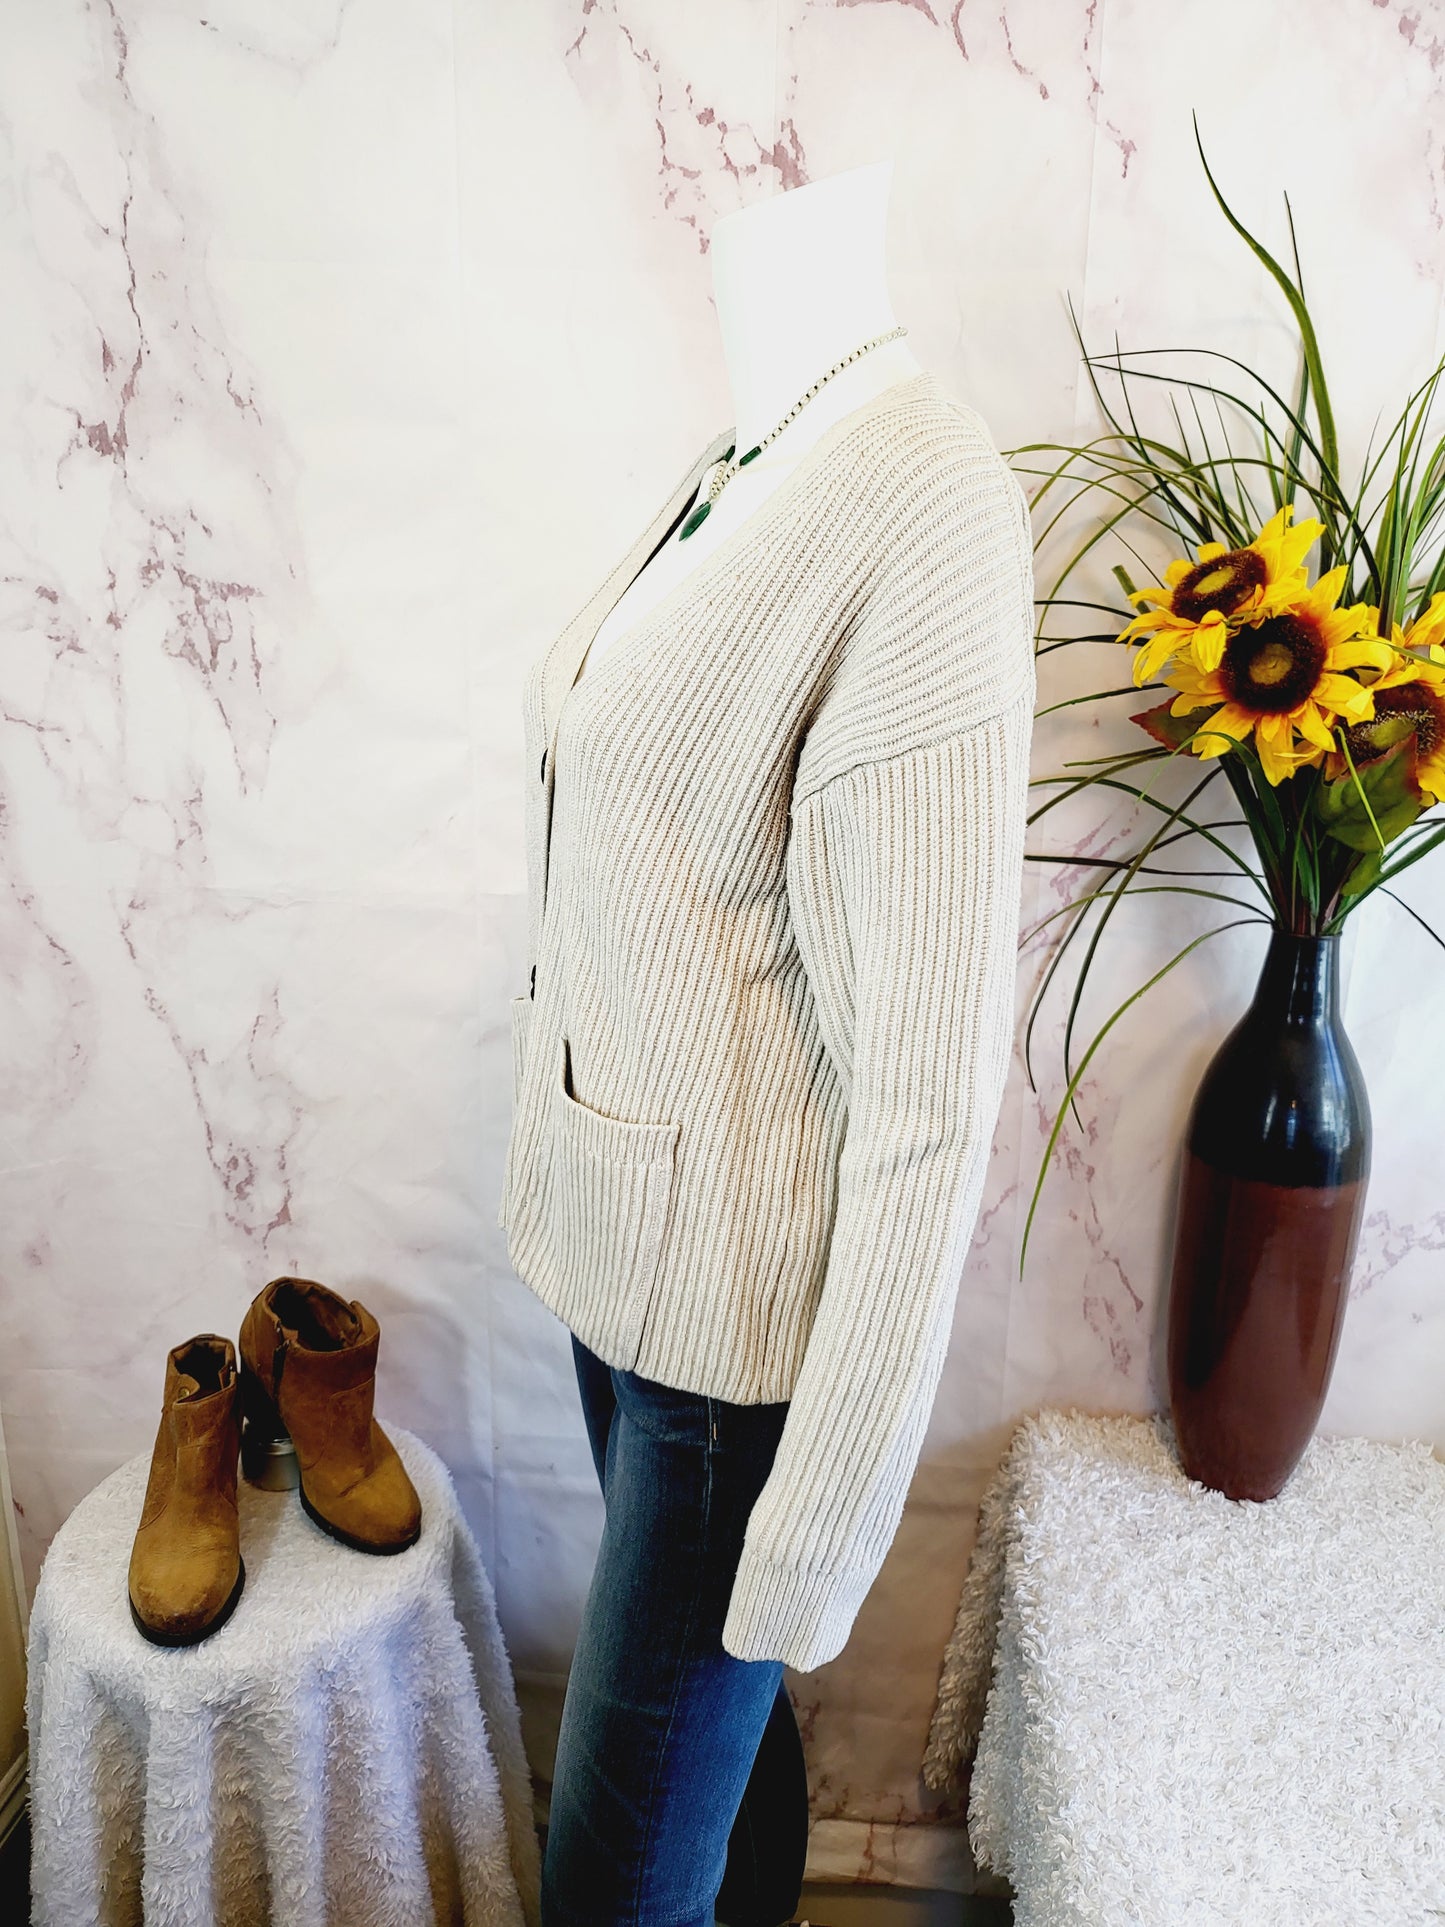 French Connection Tomasa Knit Wool Blend Button-Down Cardigan - /Beige - L